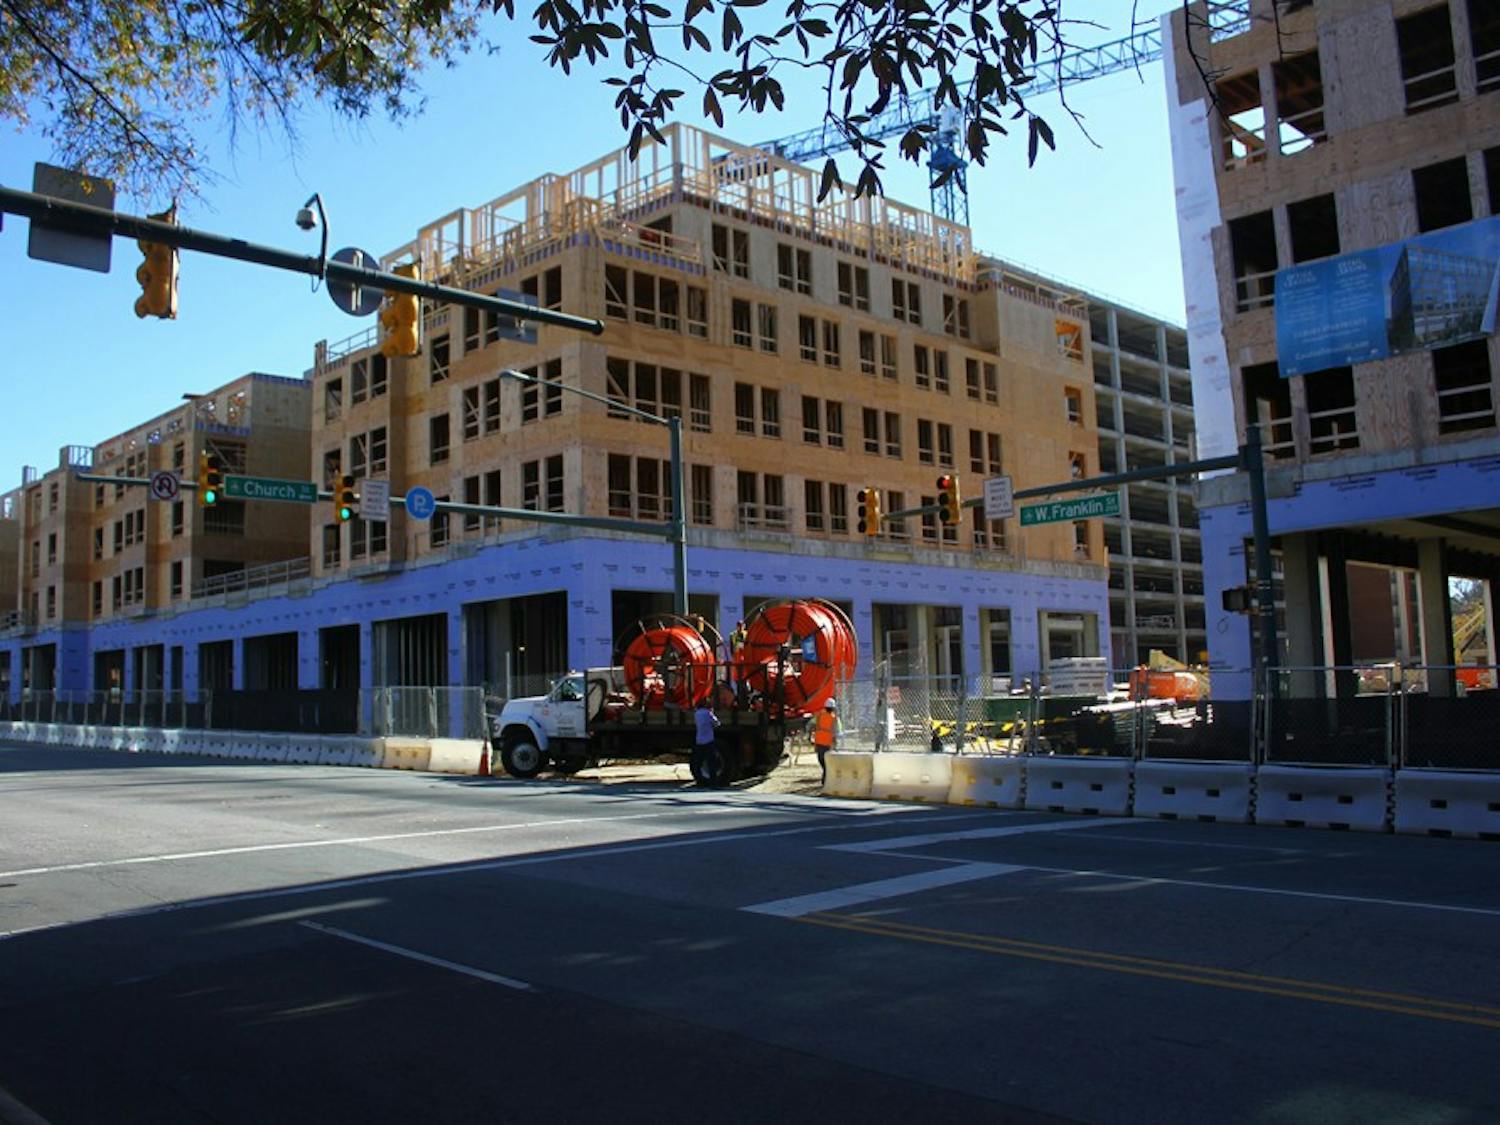 Carolina Square construction site at the intersection of Franklin and Church.